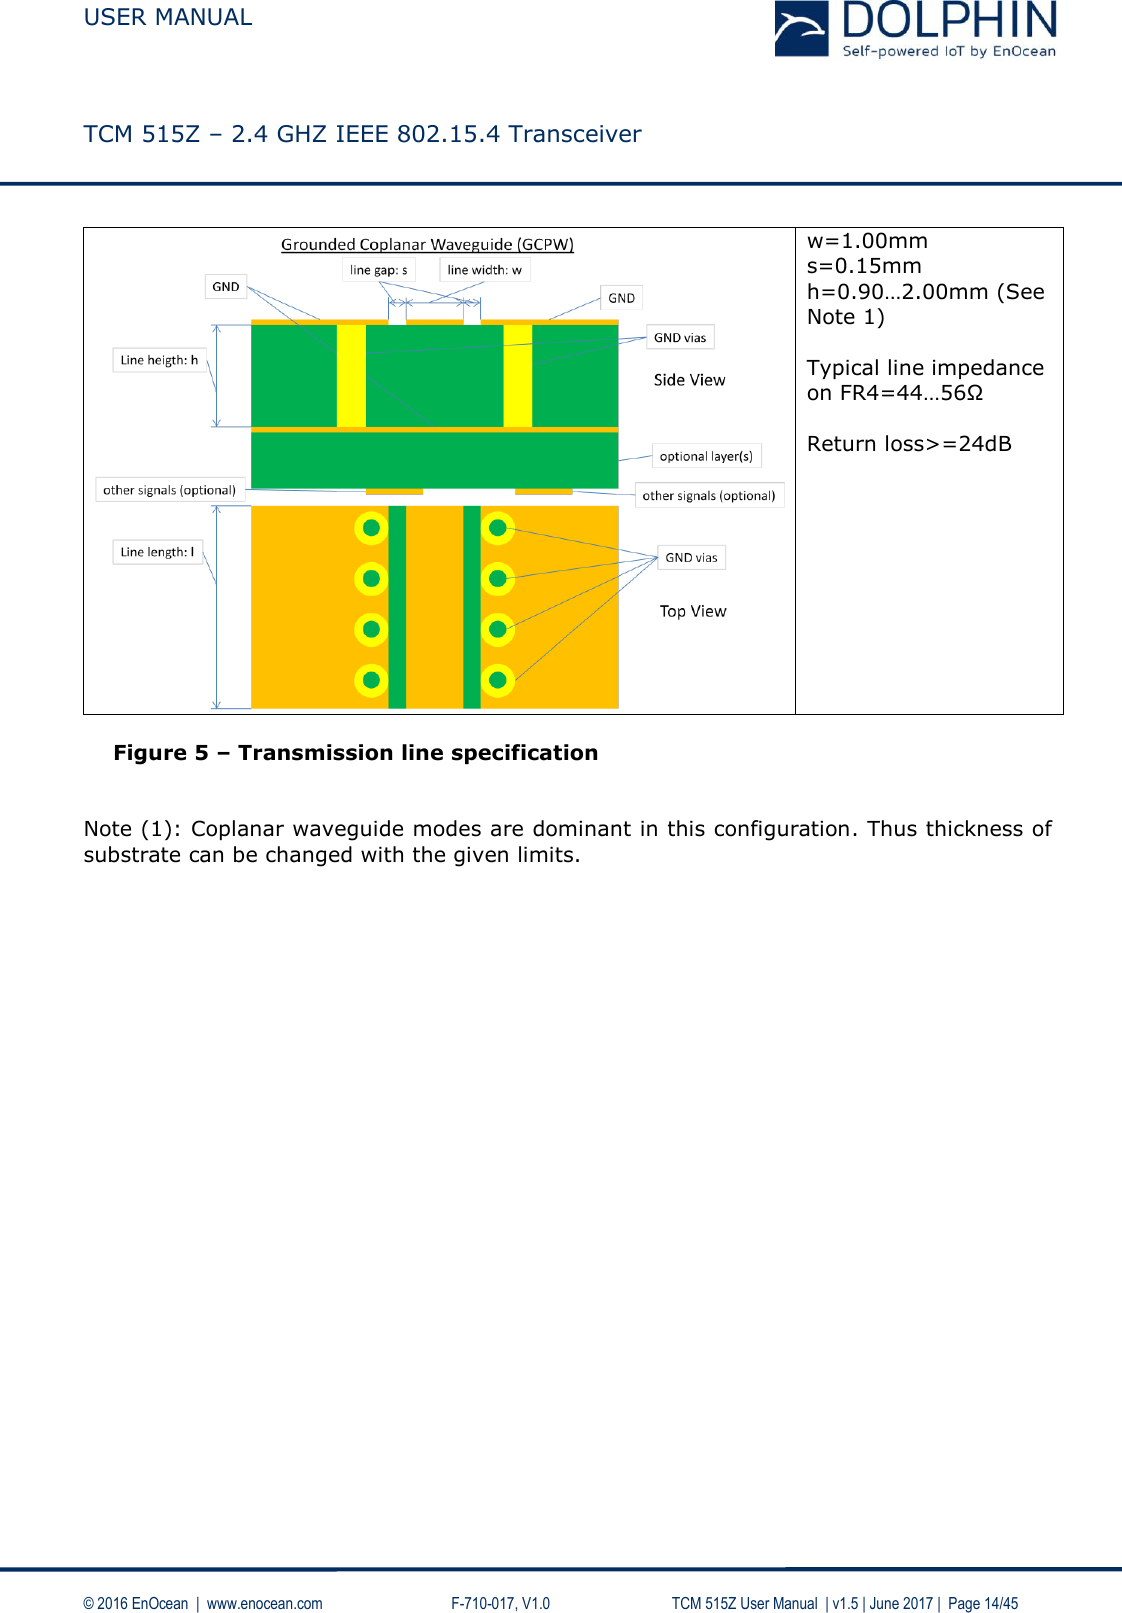  USER MANUAL    TCM 515Z – 2.4 GHZ IEEE 802.15.4 Transceiver   © 2016 EnOcean  |  www.enocean.com     F-710-017, V1.0        TCM 515Z User Manual  | v1.5 | June 2017 |  Page 14/45  w=1.00mm s=0.15mm h=0.90…2.00mm (See Note 1)  Typical line impedance on FR4=44…56Ω  Return loss&gt;=24dB  Figure 5 – Transmission line specification   Note (1): Coplanar waveguide modes are dominant in this configuration. Thus thickness of substrate can be changed with the given limits.    